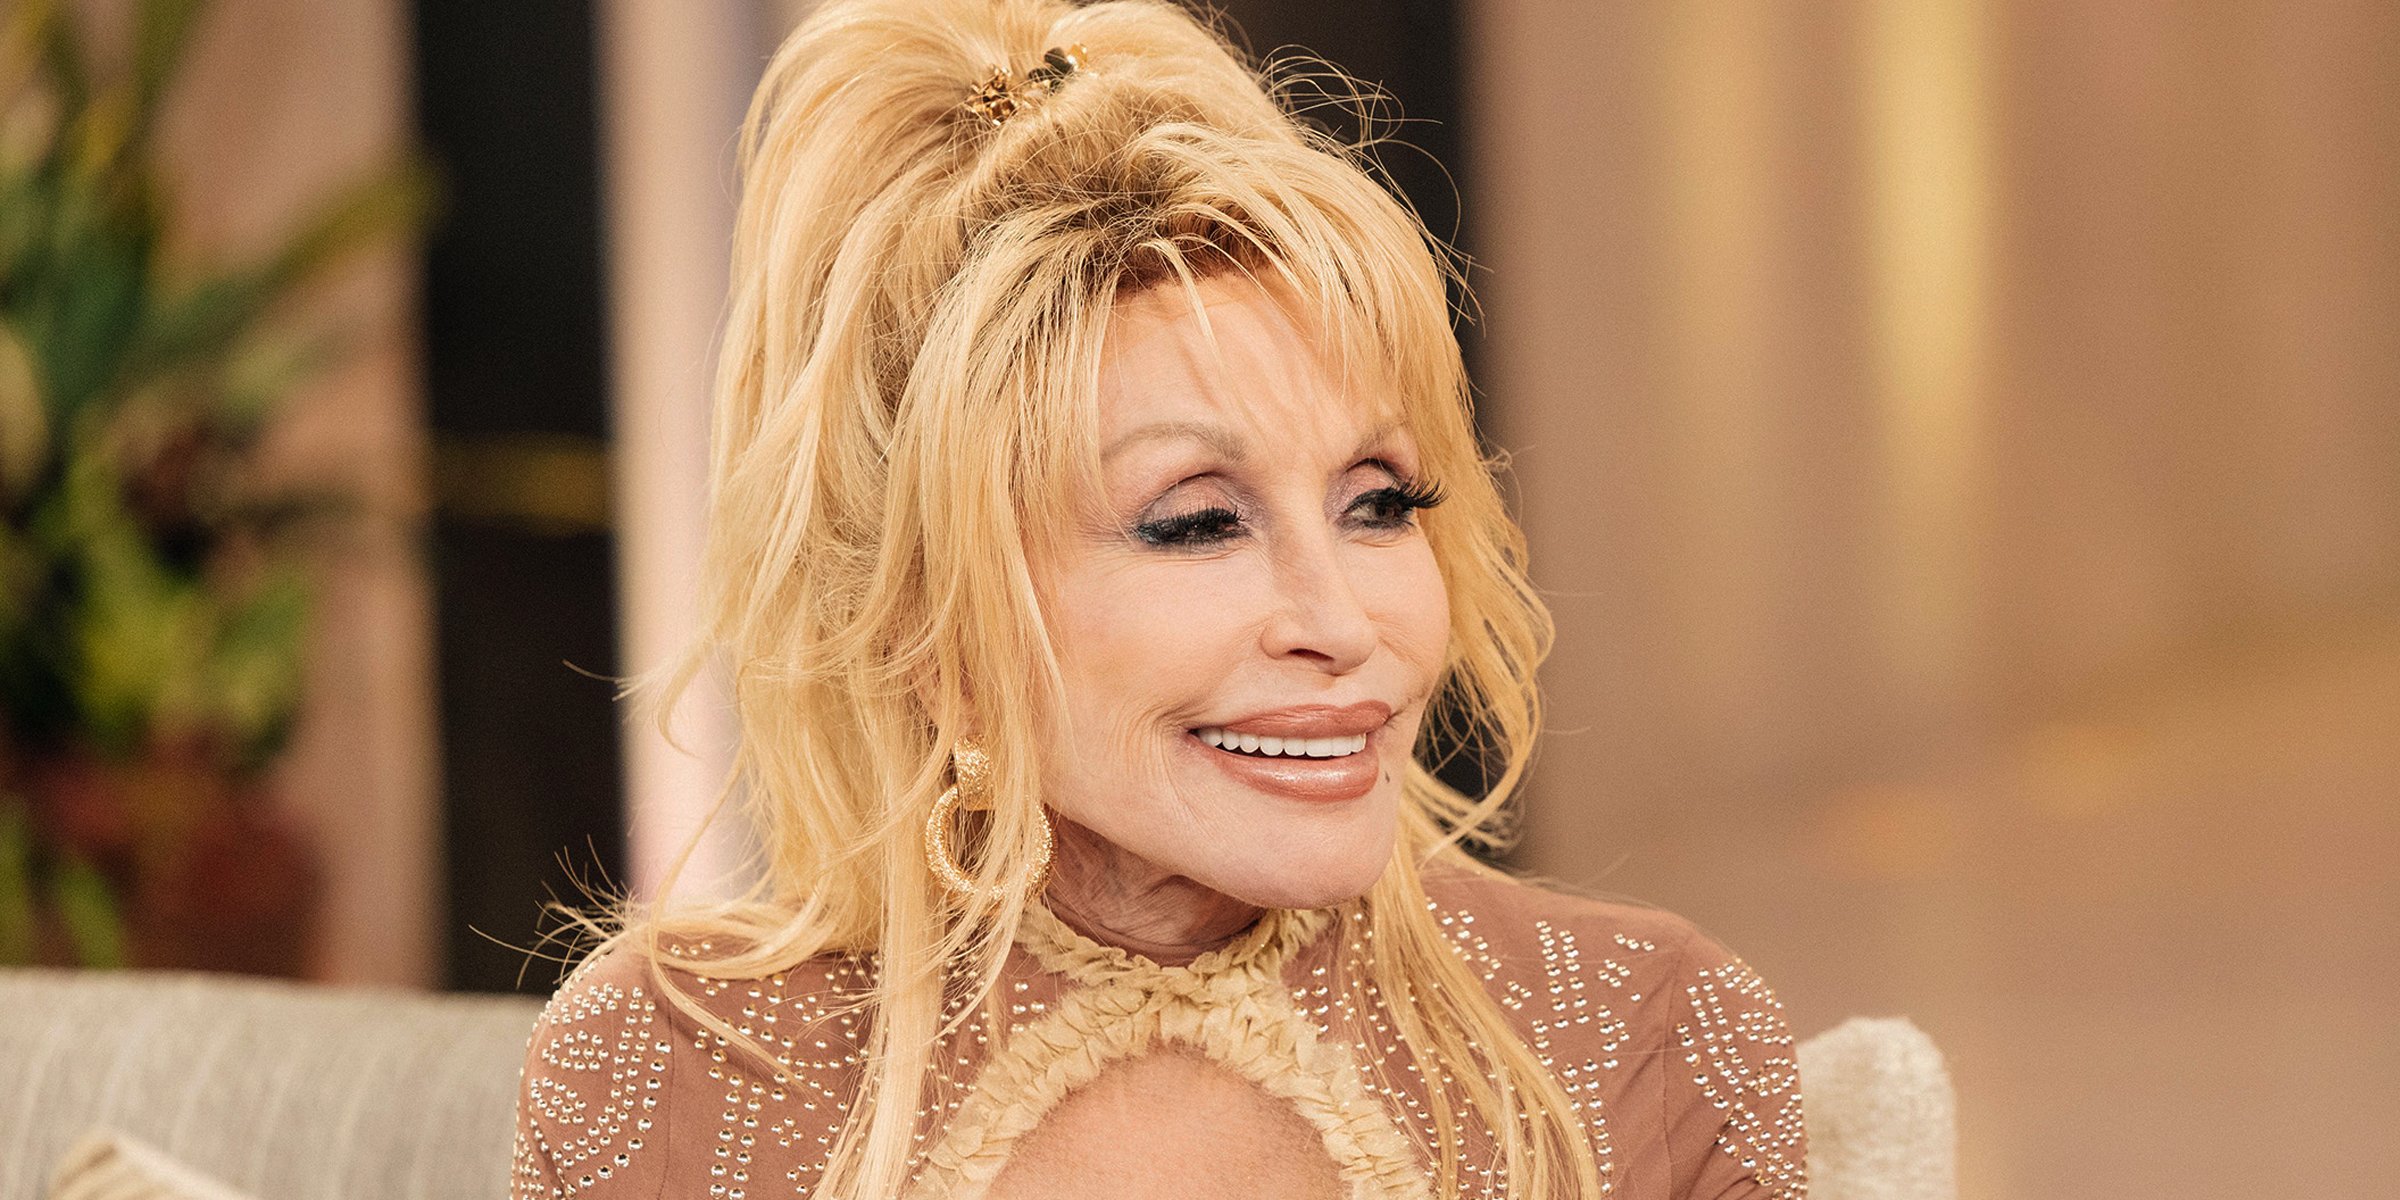 Dolly Parton | Source: Getty Images